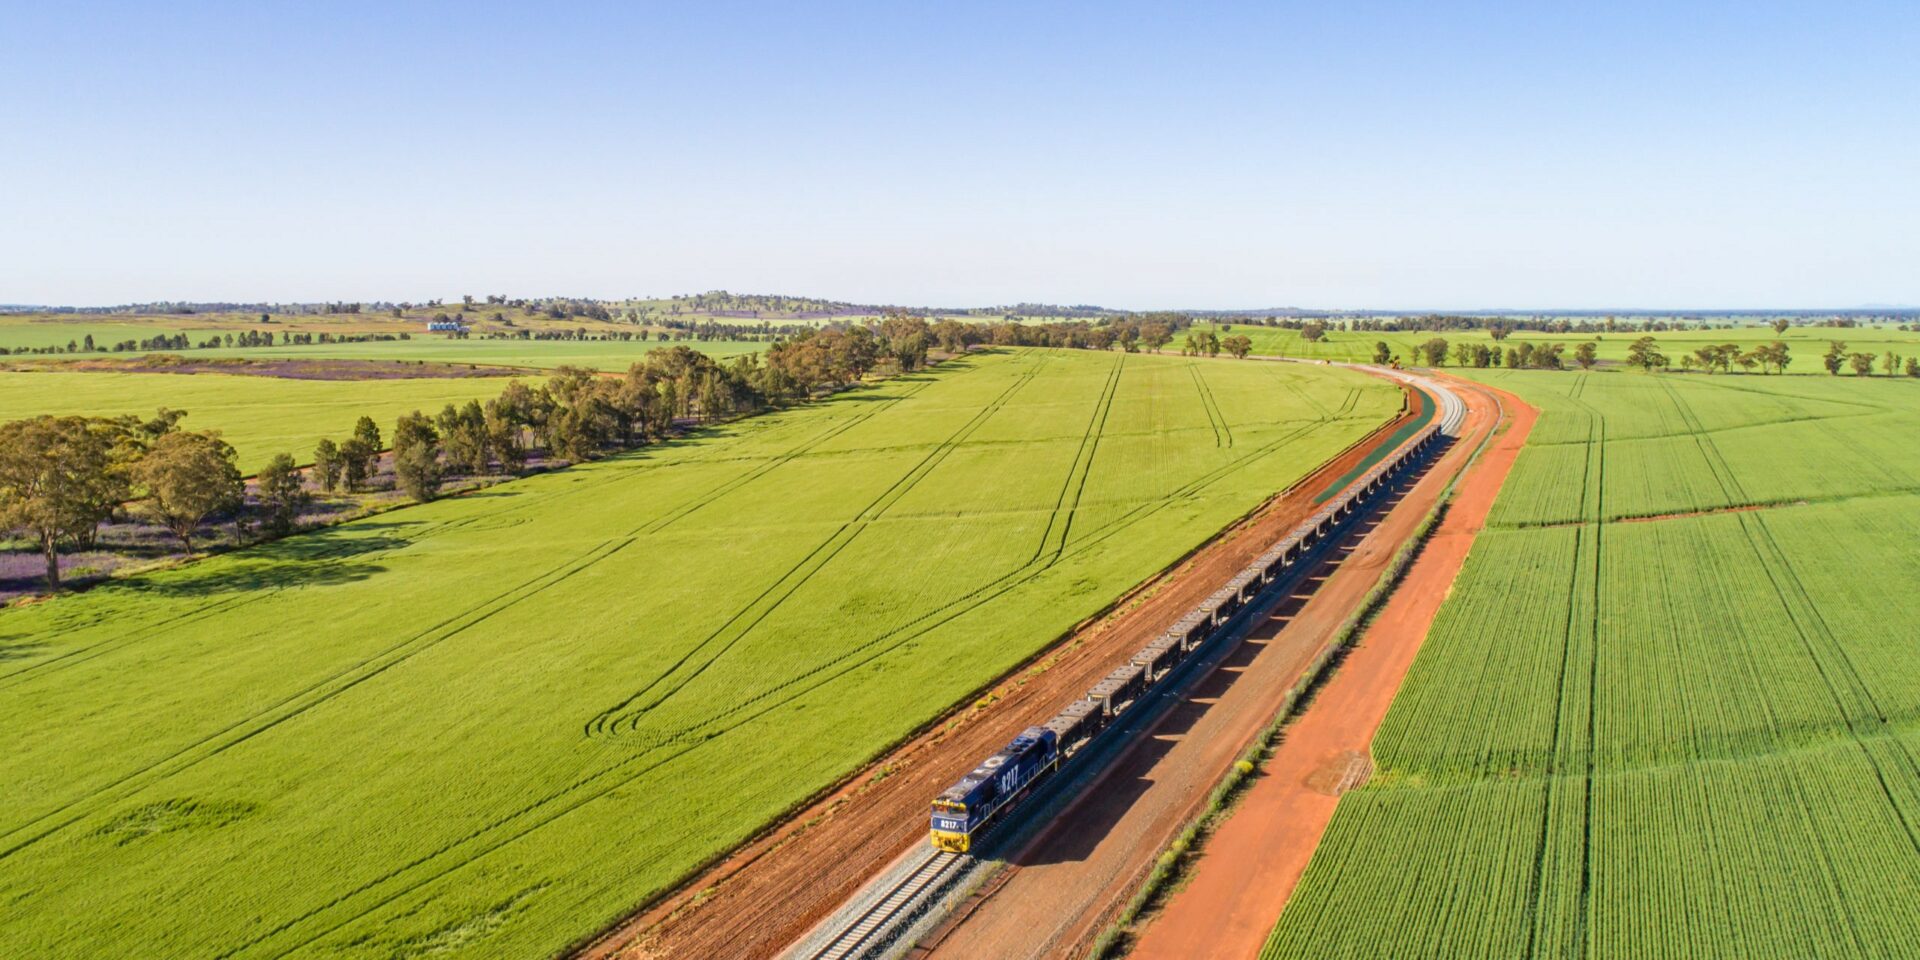 A long cargo train on the new Inland Rail in Australia.